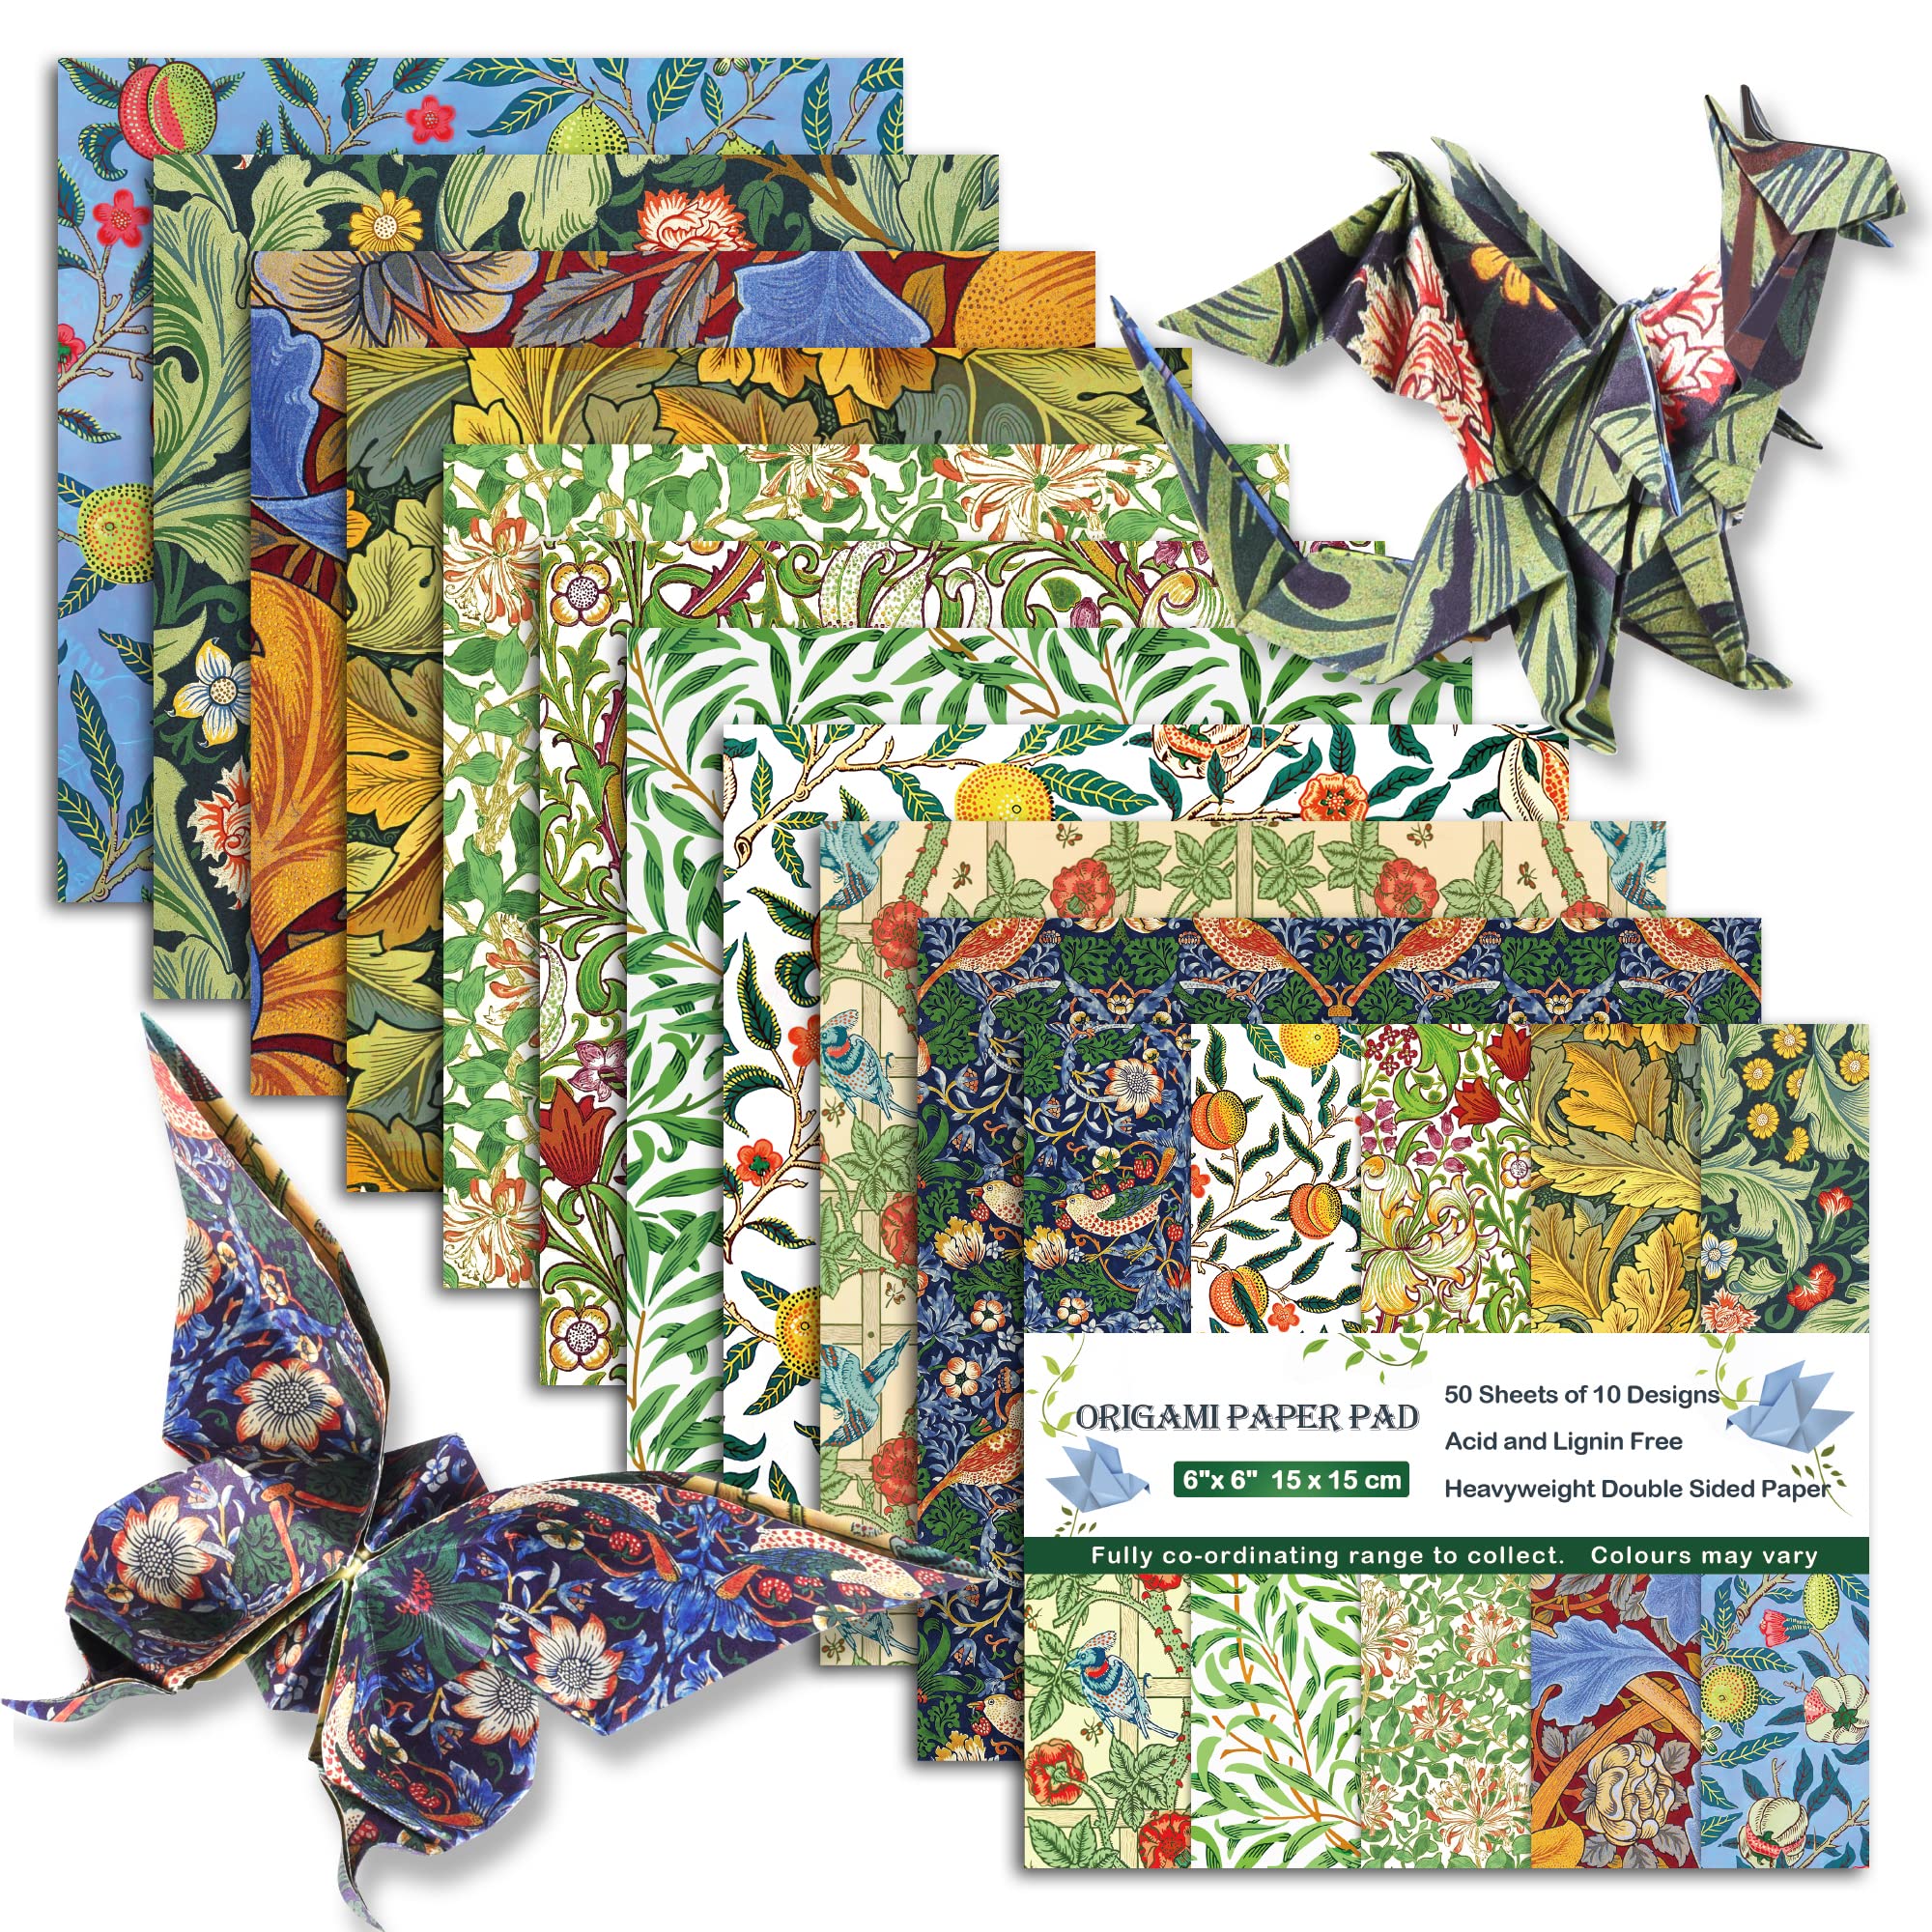 1 Piece/50 Sheets Of Double Sided Origami Paper, 6x6 Inches, 12